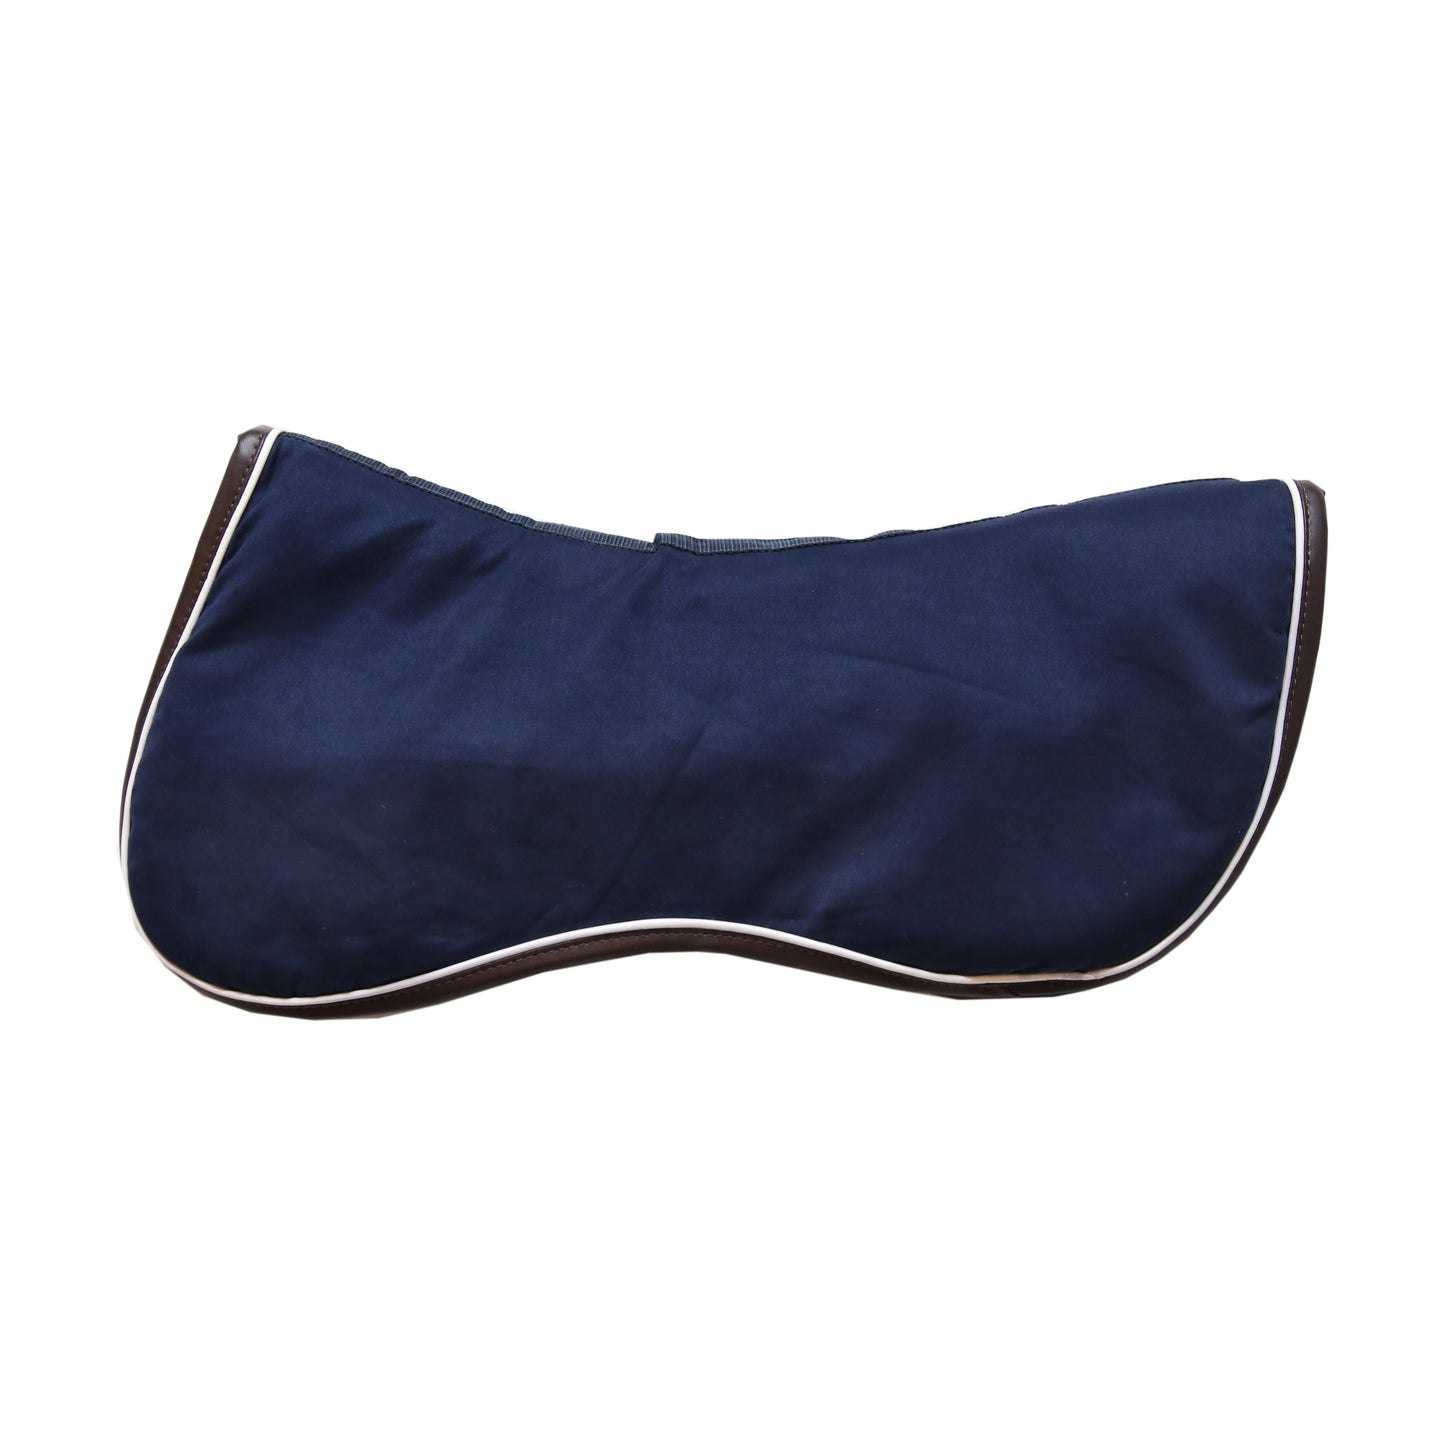 Kentucky Horsewear Half Pad Intelligent Absorb - Thin-Trailrace Equestrian Outfitters-The Equestrian